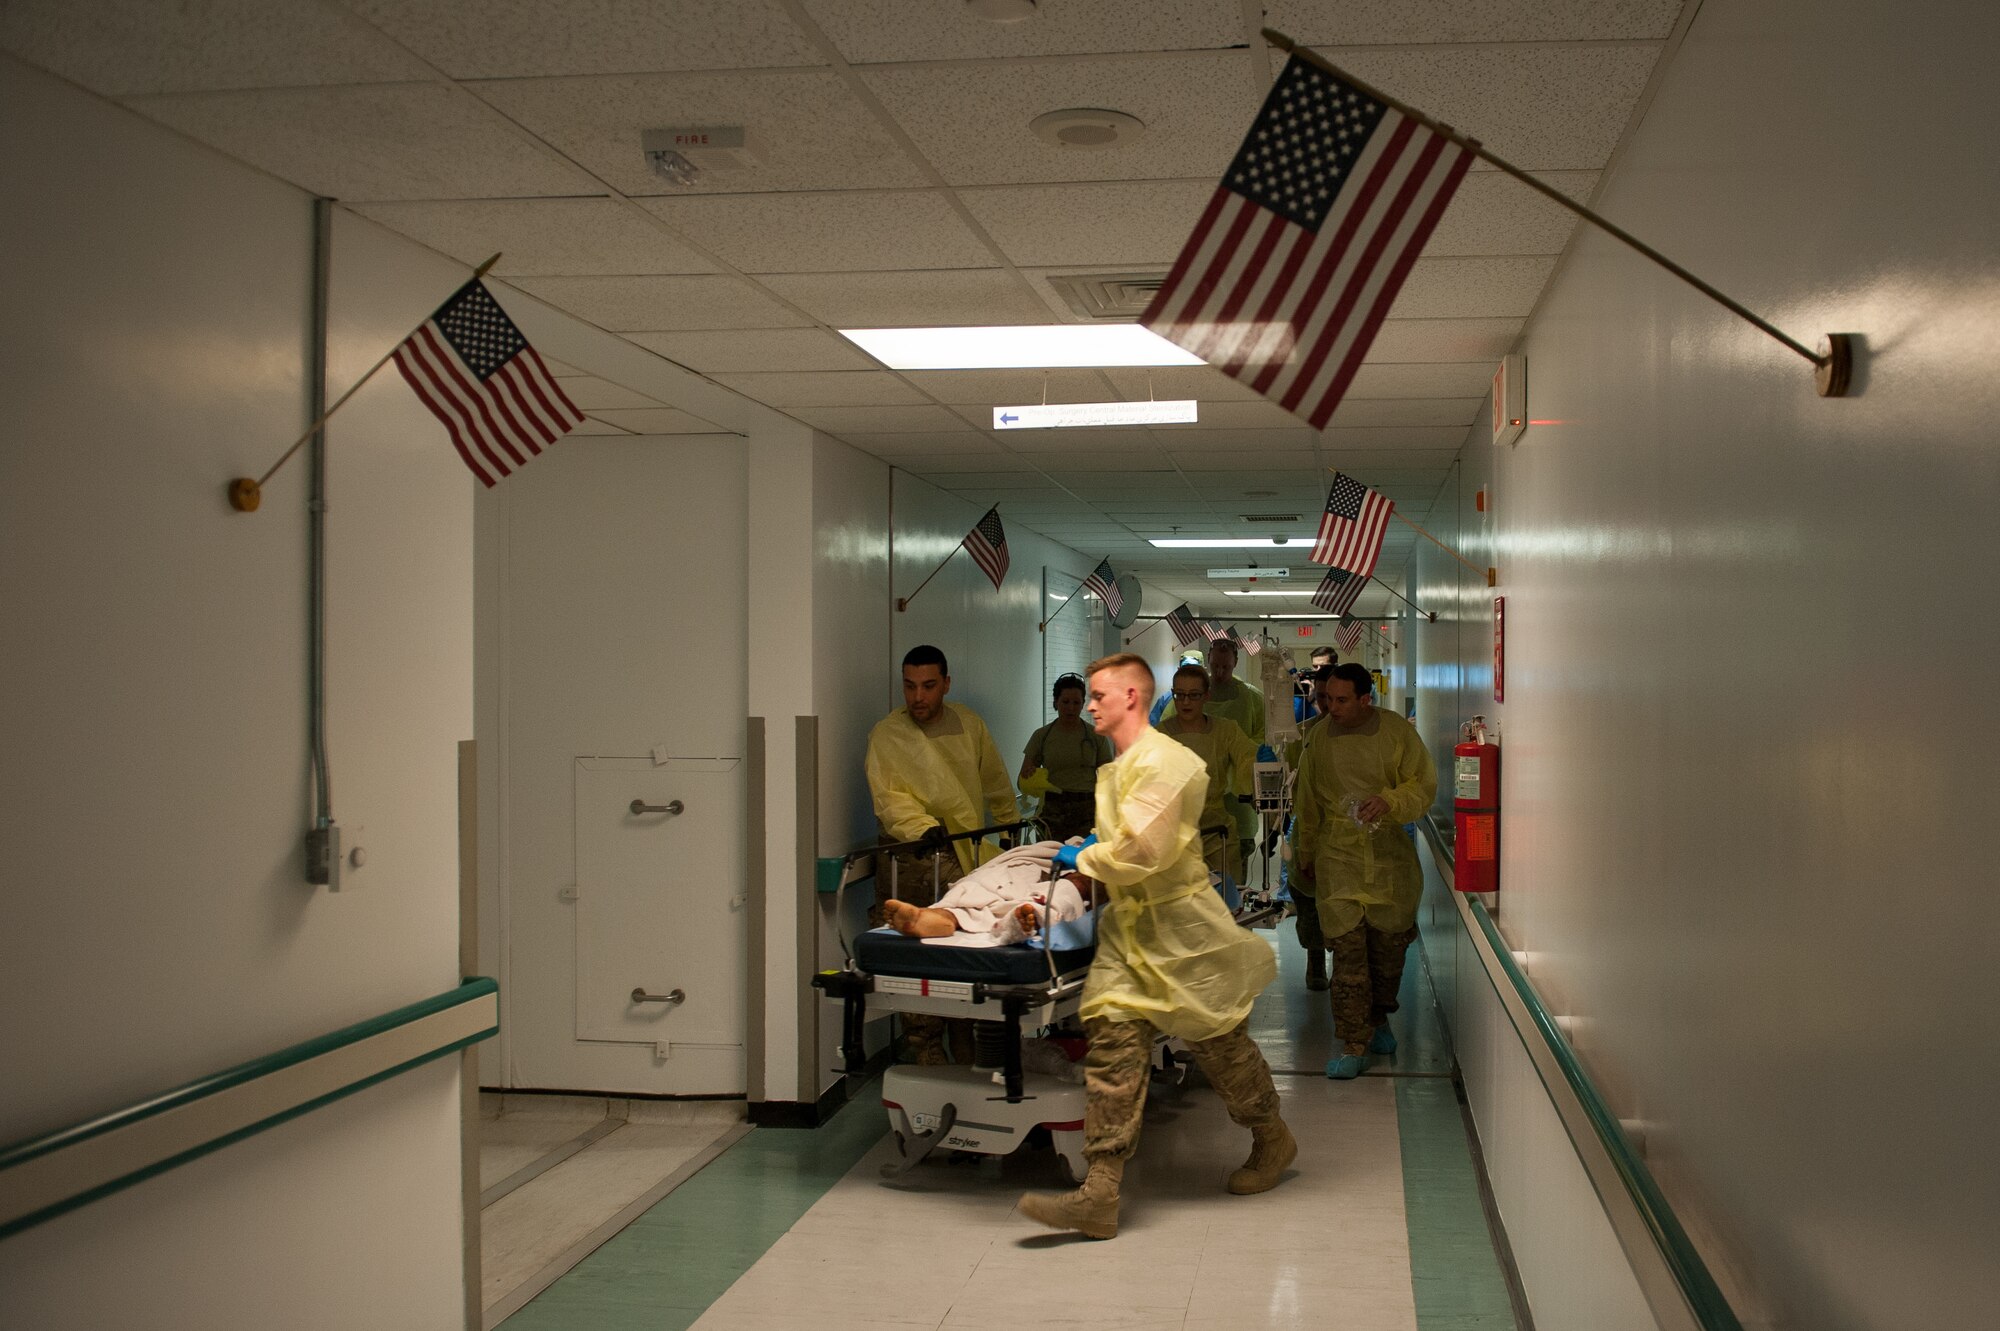 U.S. Airmen assigned to the 455th Expeditionary Medical Group transport an Afghan National Defense and Security Forces soldier who sustained trauma from a gunshot to the operating room at the Craig Joint Theater Hospital, Bagram Air Field, Afghanistan, Sept. 26, 2015. The CJTH provides surgical capabilities in trauma, general surgery, orthopedics, neurosurgery, urology, vascular surgery and otolaryngology, all of which are critical to helping 98 percent of patients who come to the hospital survive their injuries. (U.S. Air Force photo by Tech. Sgt. Joseph Swafford/Released)